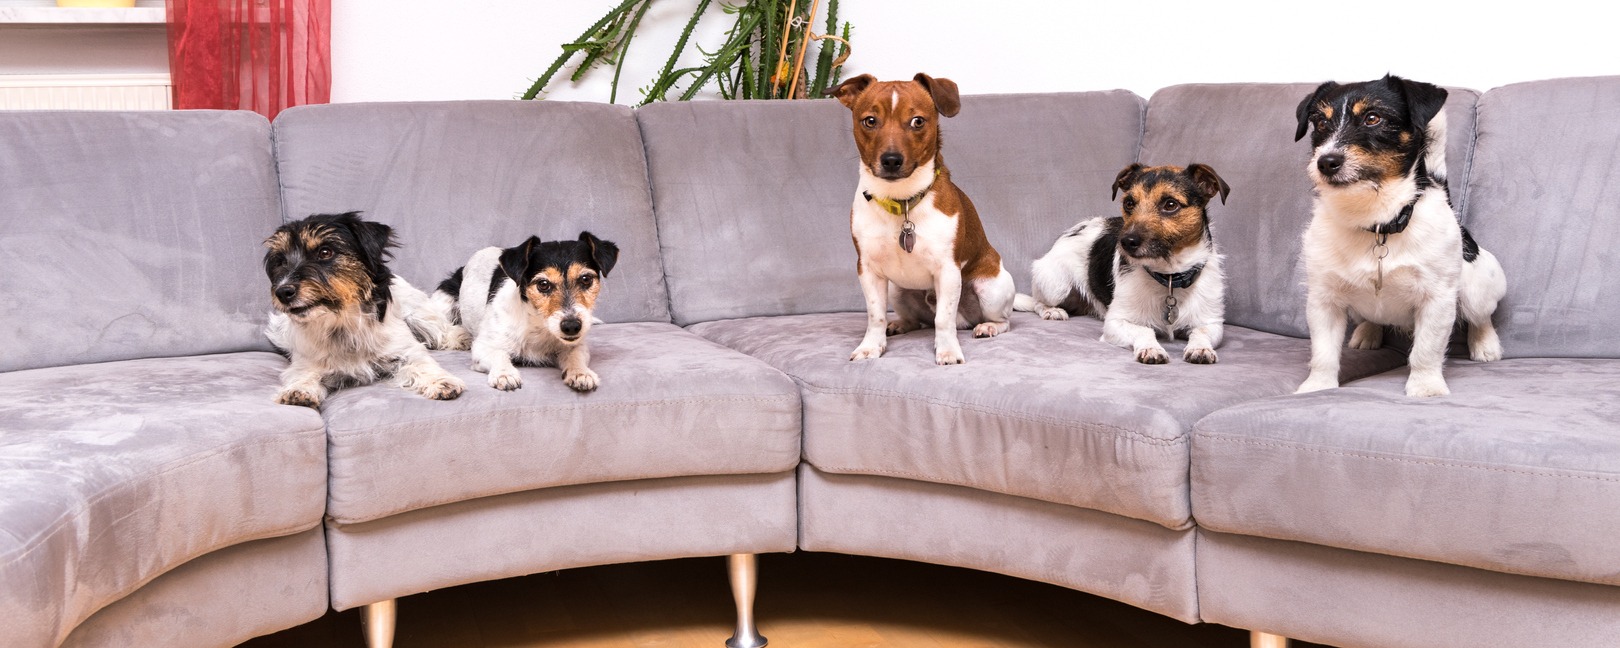 Pack of Jack Russell Terrier Dogs on a sectional softa